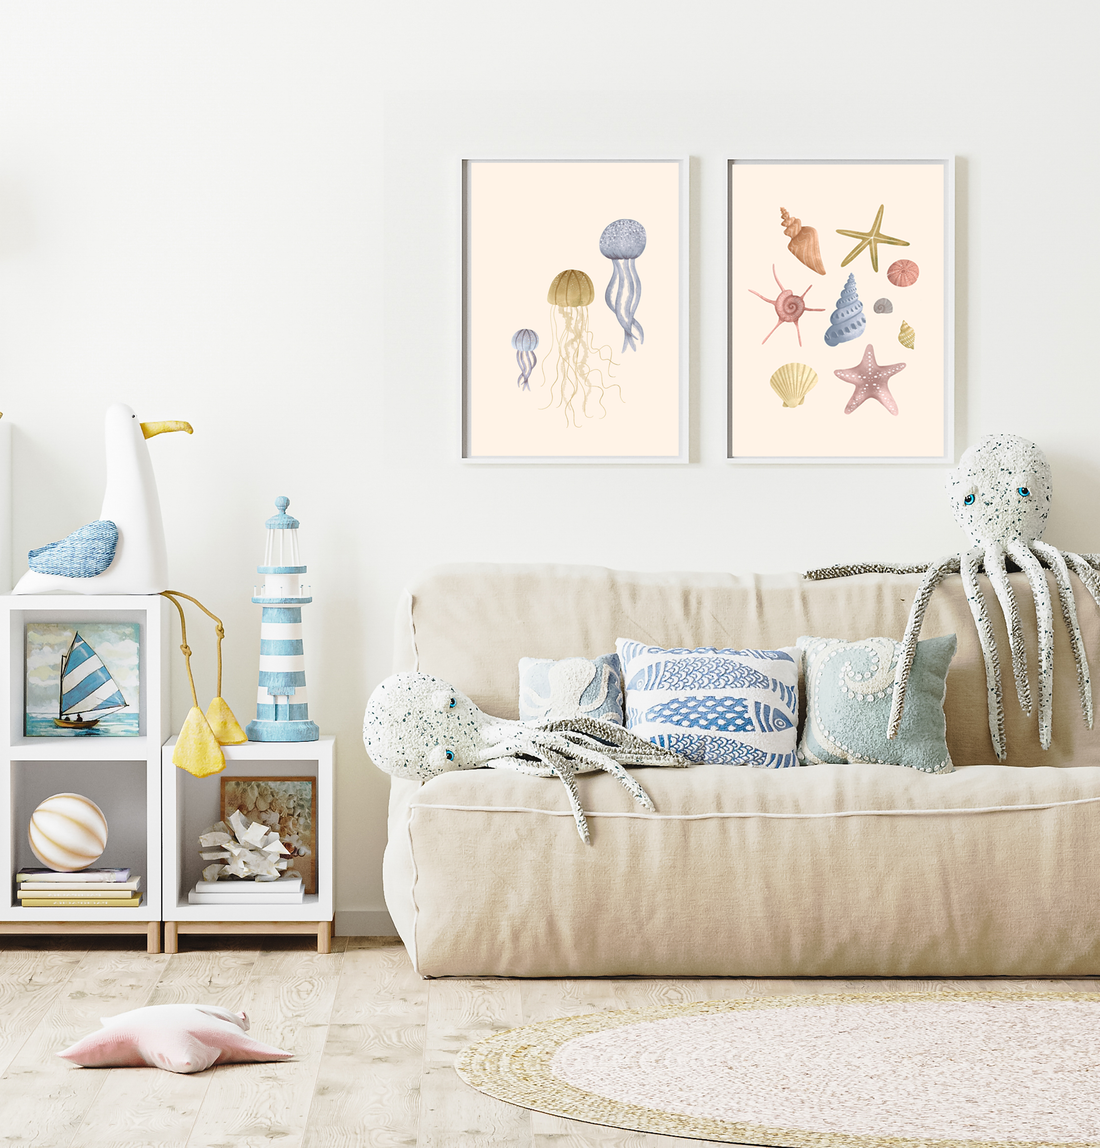 How to create an 'Under the Sea' themed kids bedroom or nursery